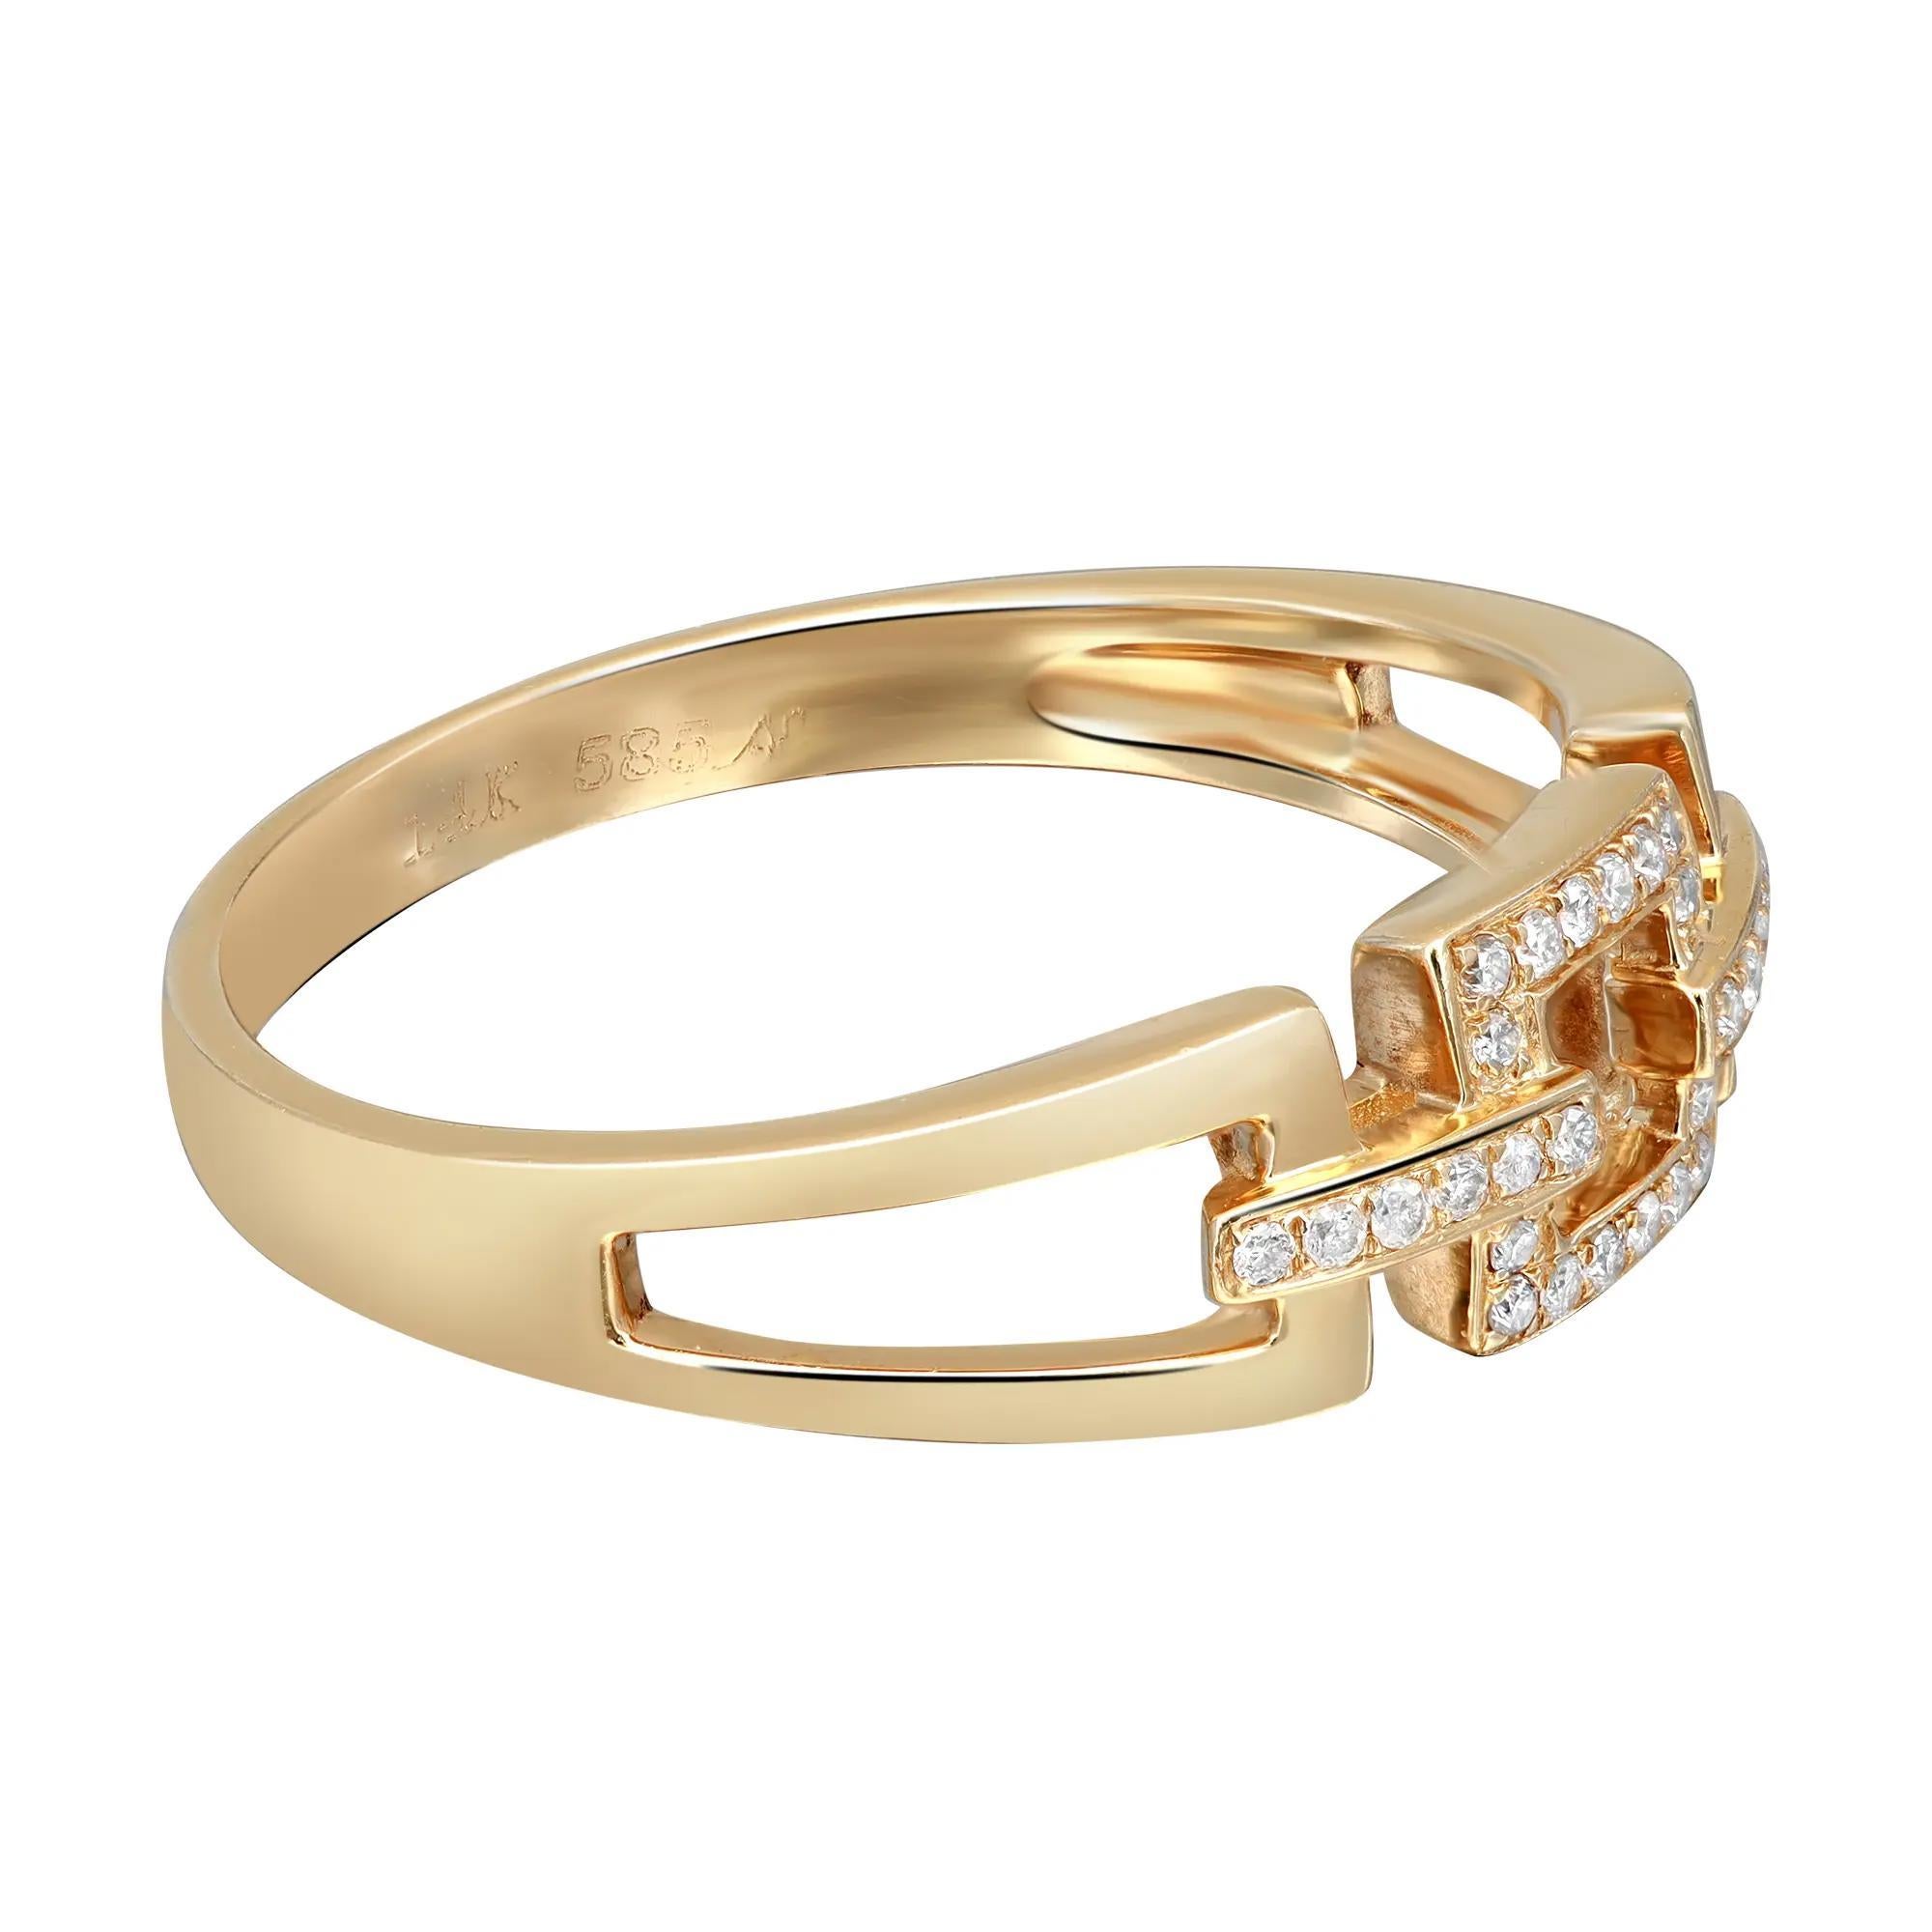 Classic and elegant diamond band ring rendered in highly polished 14K yellow gold. This ring features round brilliant cut diamonds in pave setting totaling 0.09 carat. Diamond quality: I color and SI clarity. Ring size: 7.5. Ring width: 6mm. Total